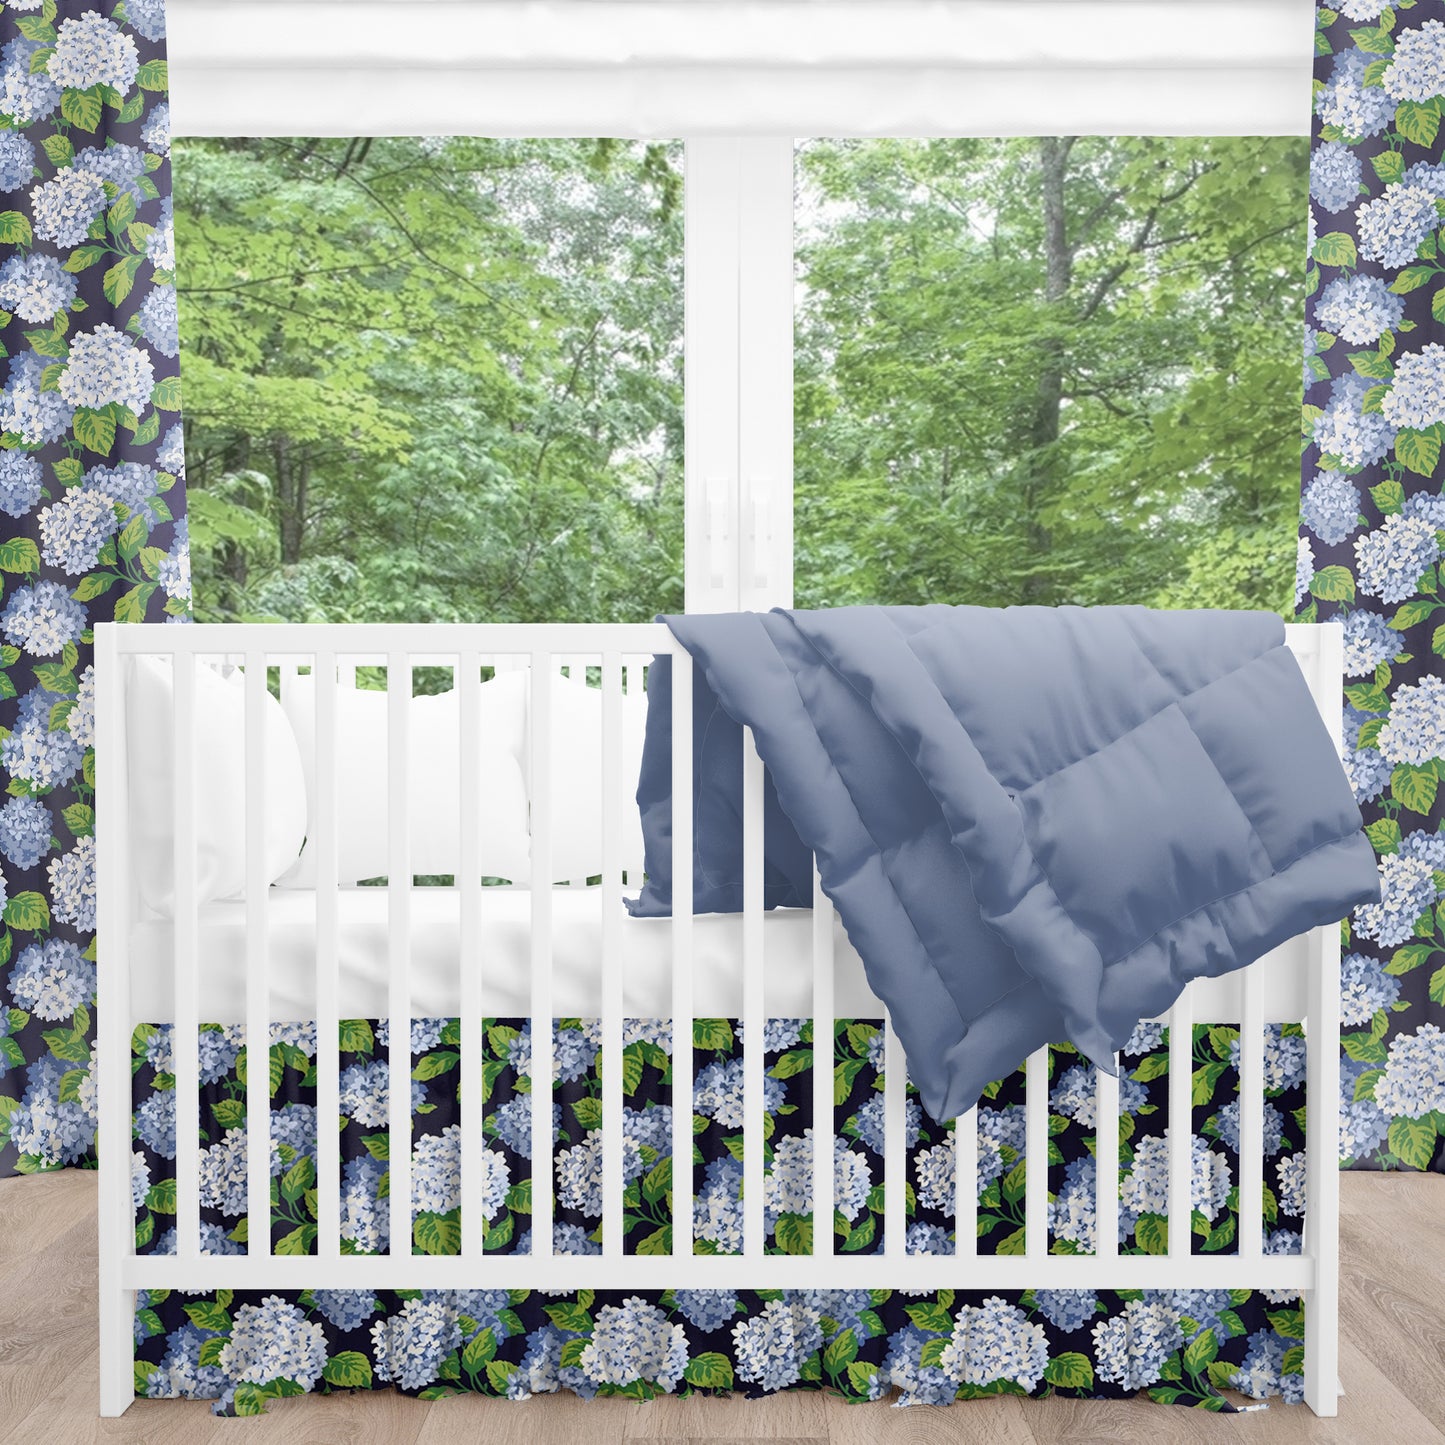 Gathered Crib Skirt in Summerwind Navy Blue Hydrangea Floral, Large Scale